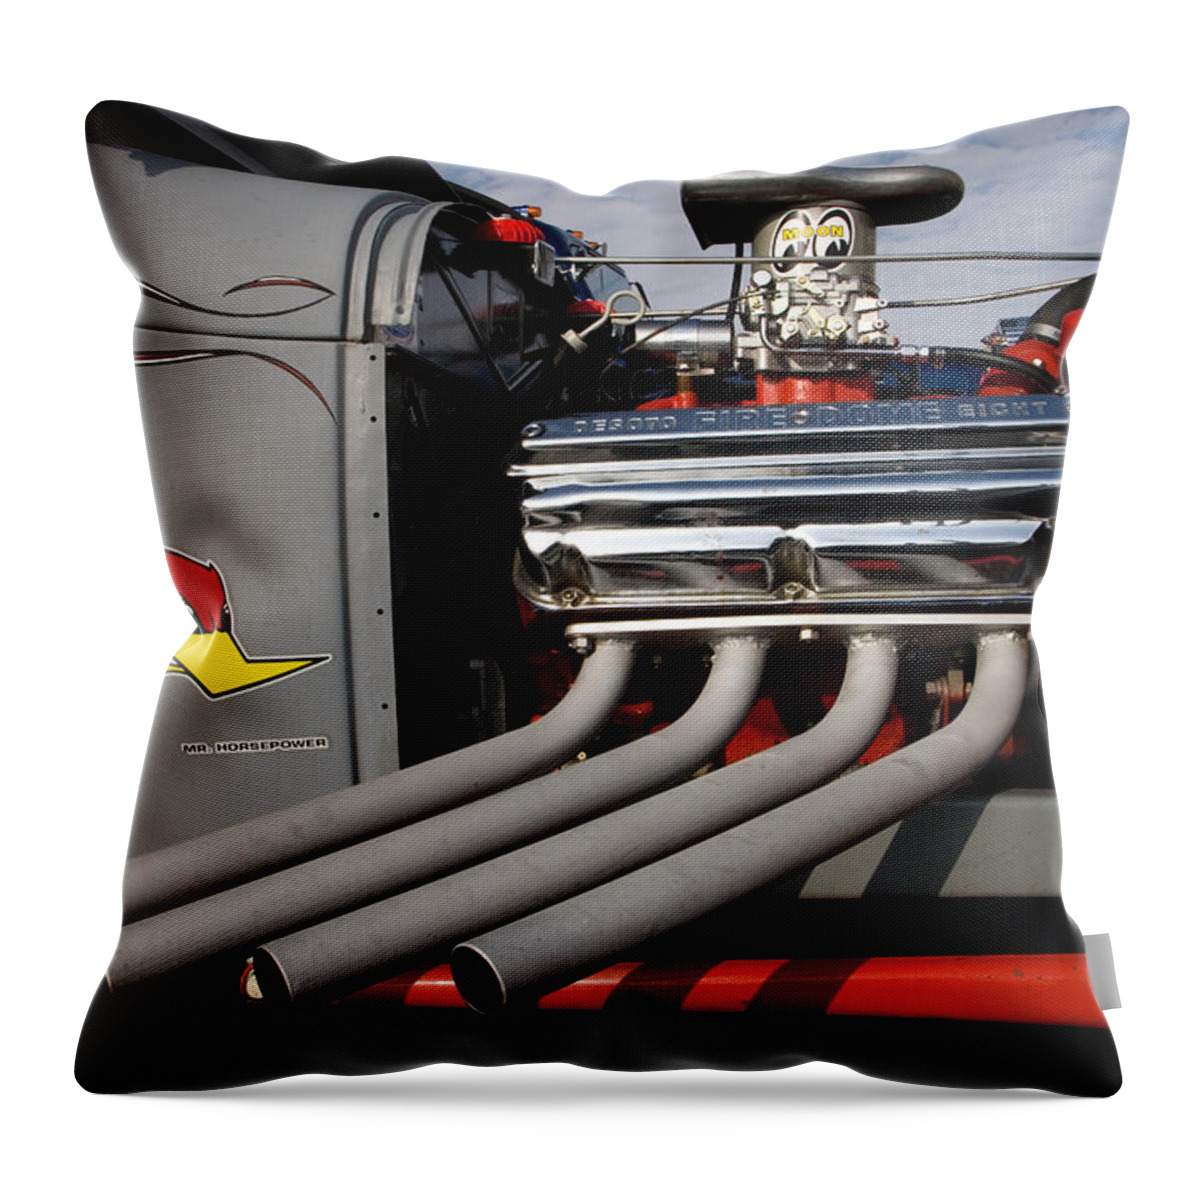 Desoto Throw Pillow featuring the photograph More Power by Karen Lee Ensley